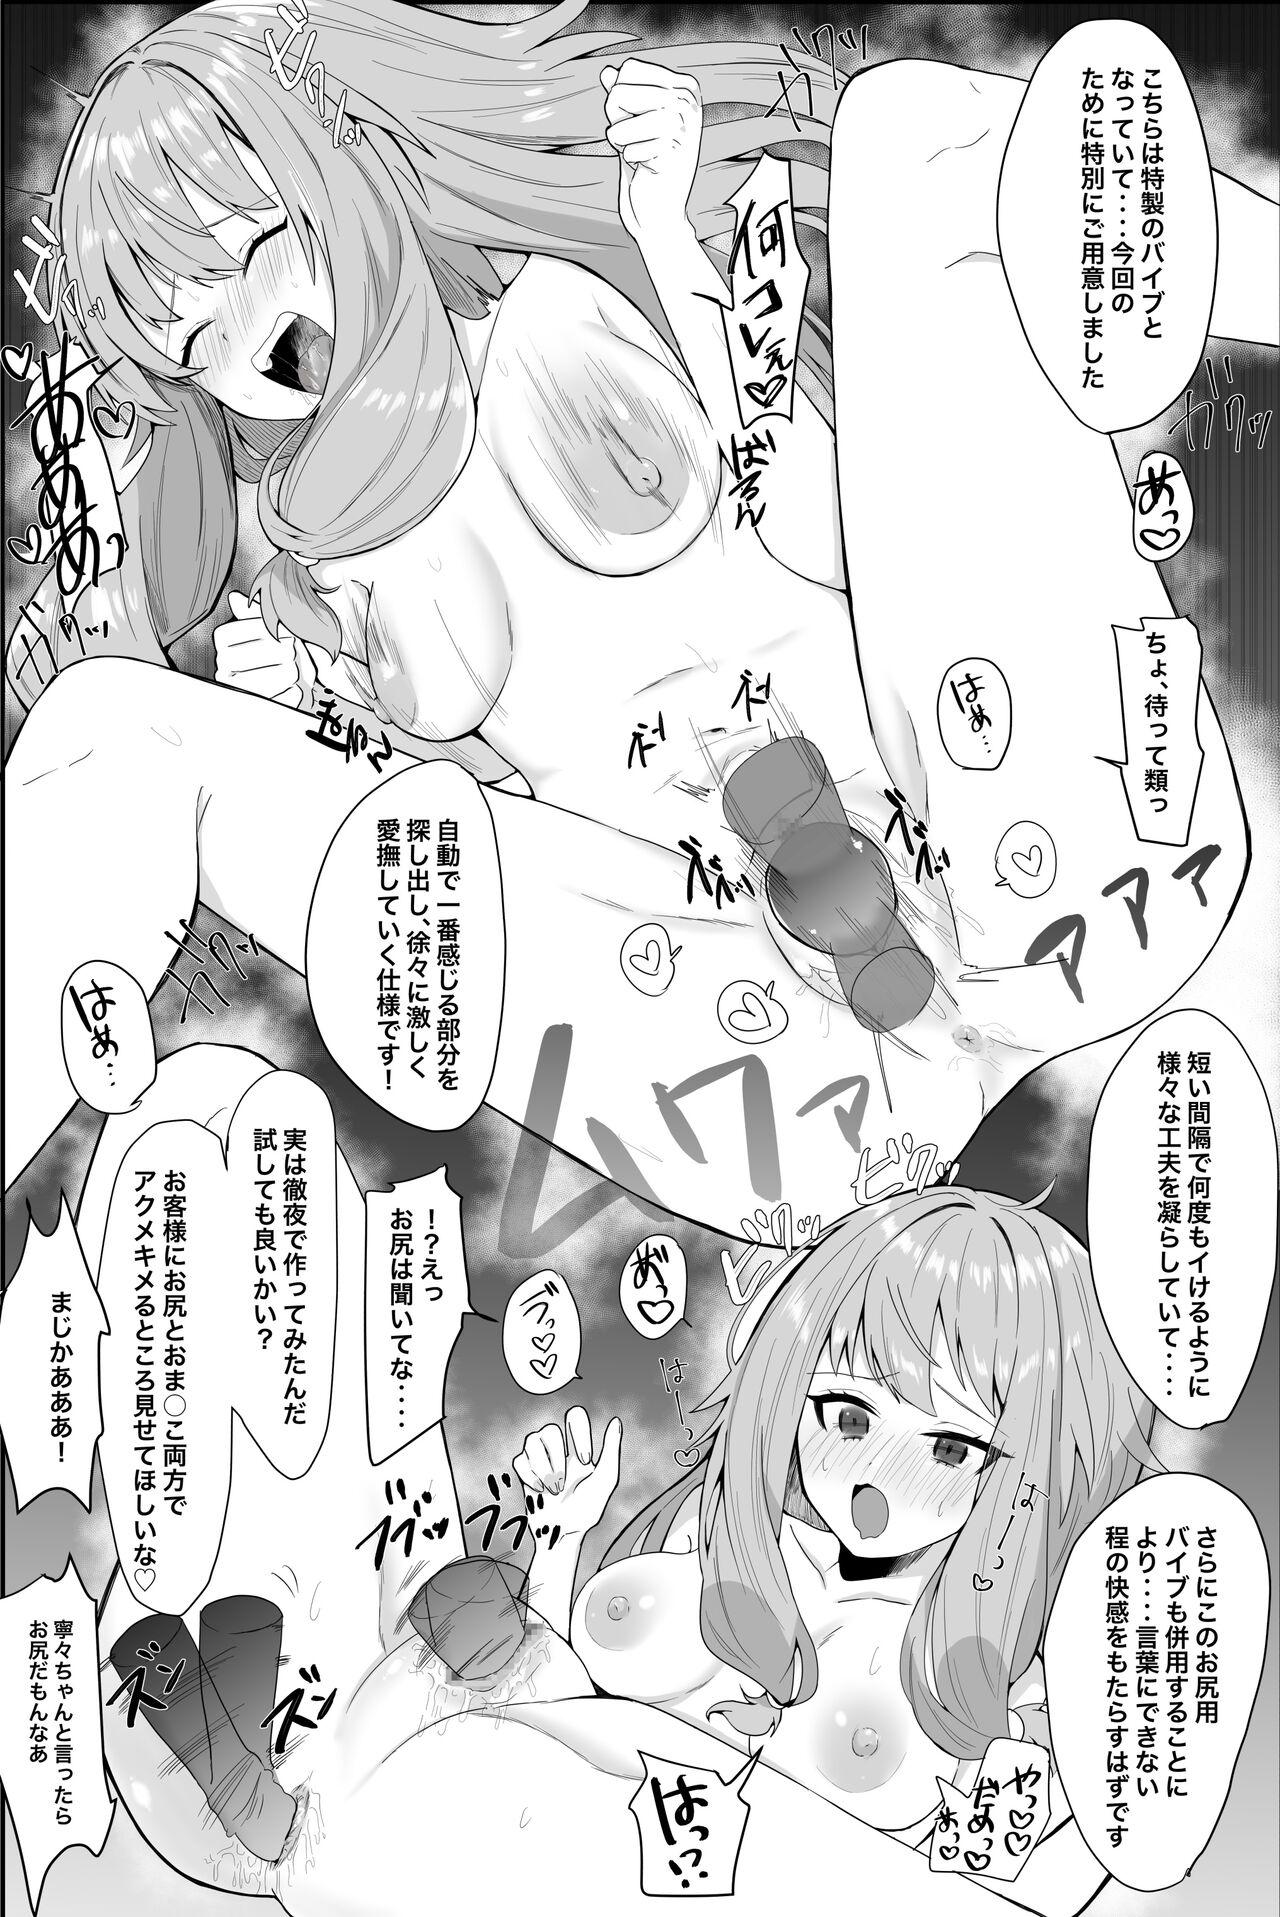 Lover えむねねちゃん決着編! - Project sekai Mofos - Page 4